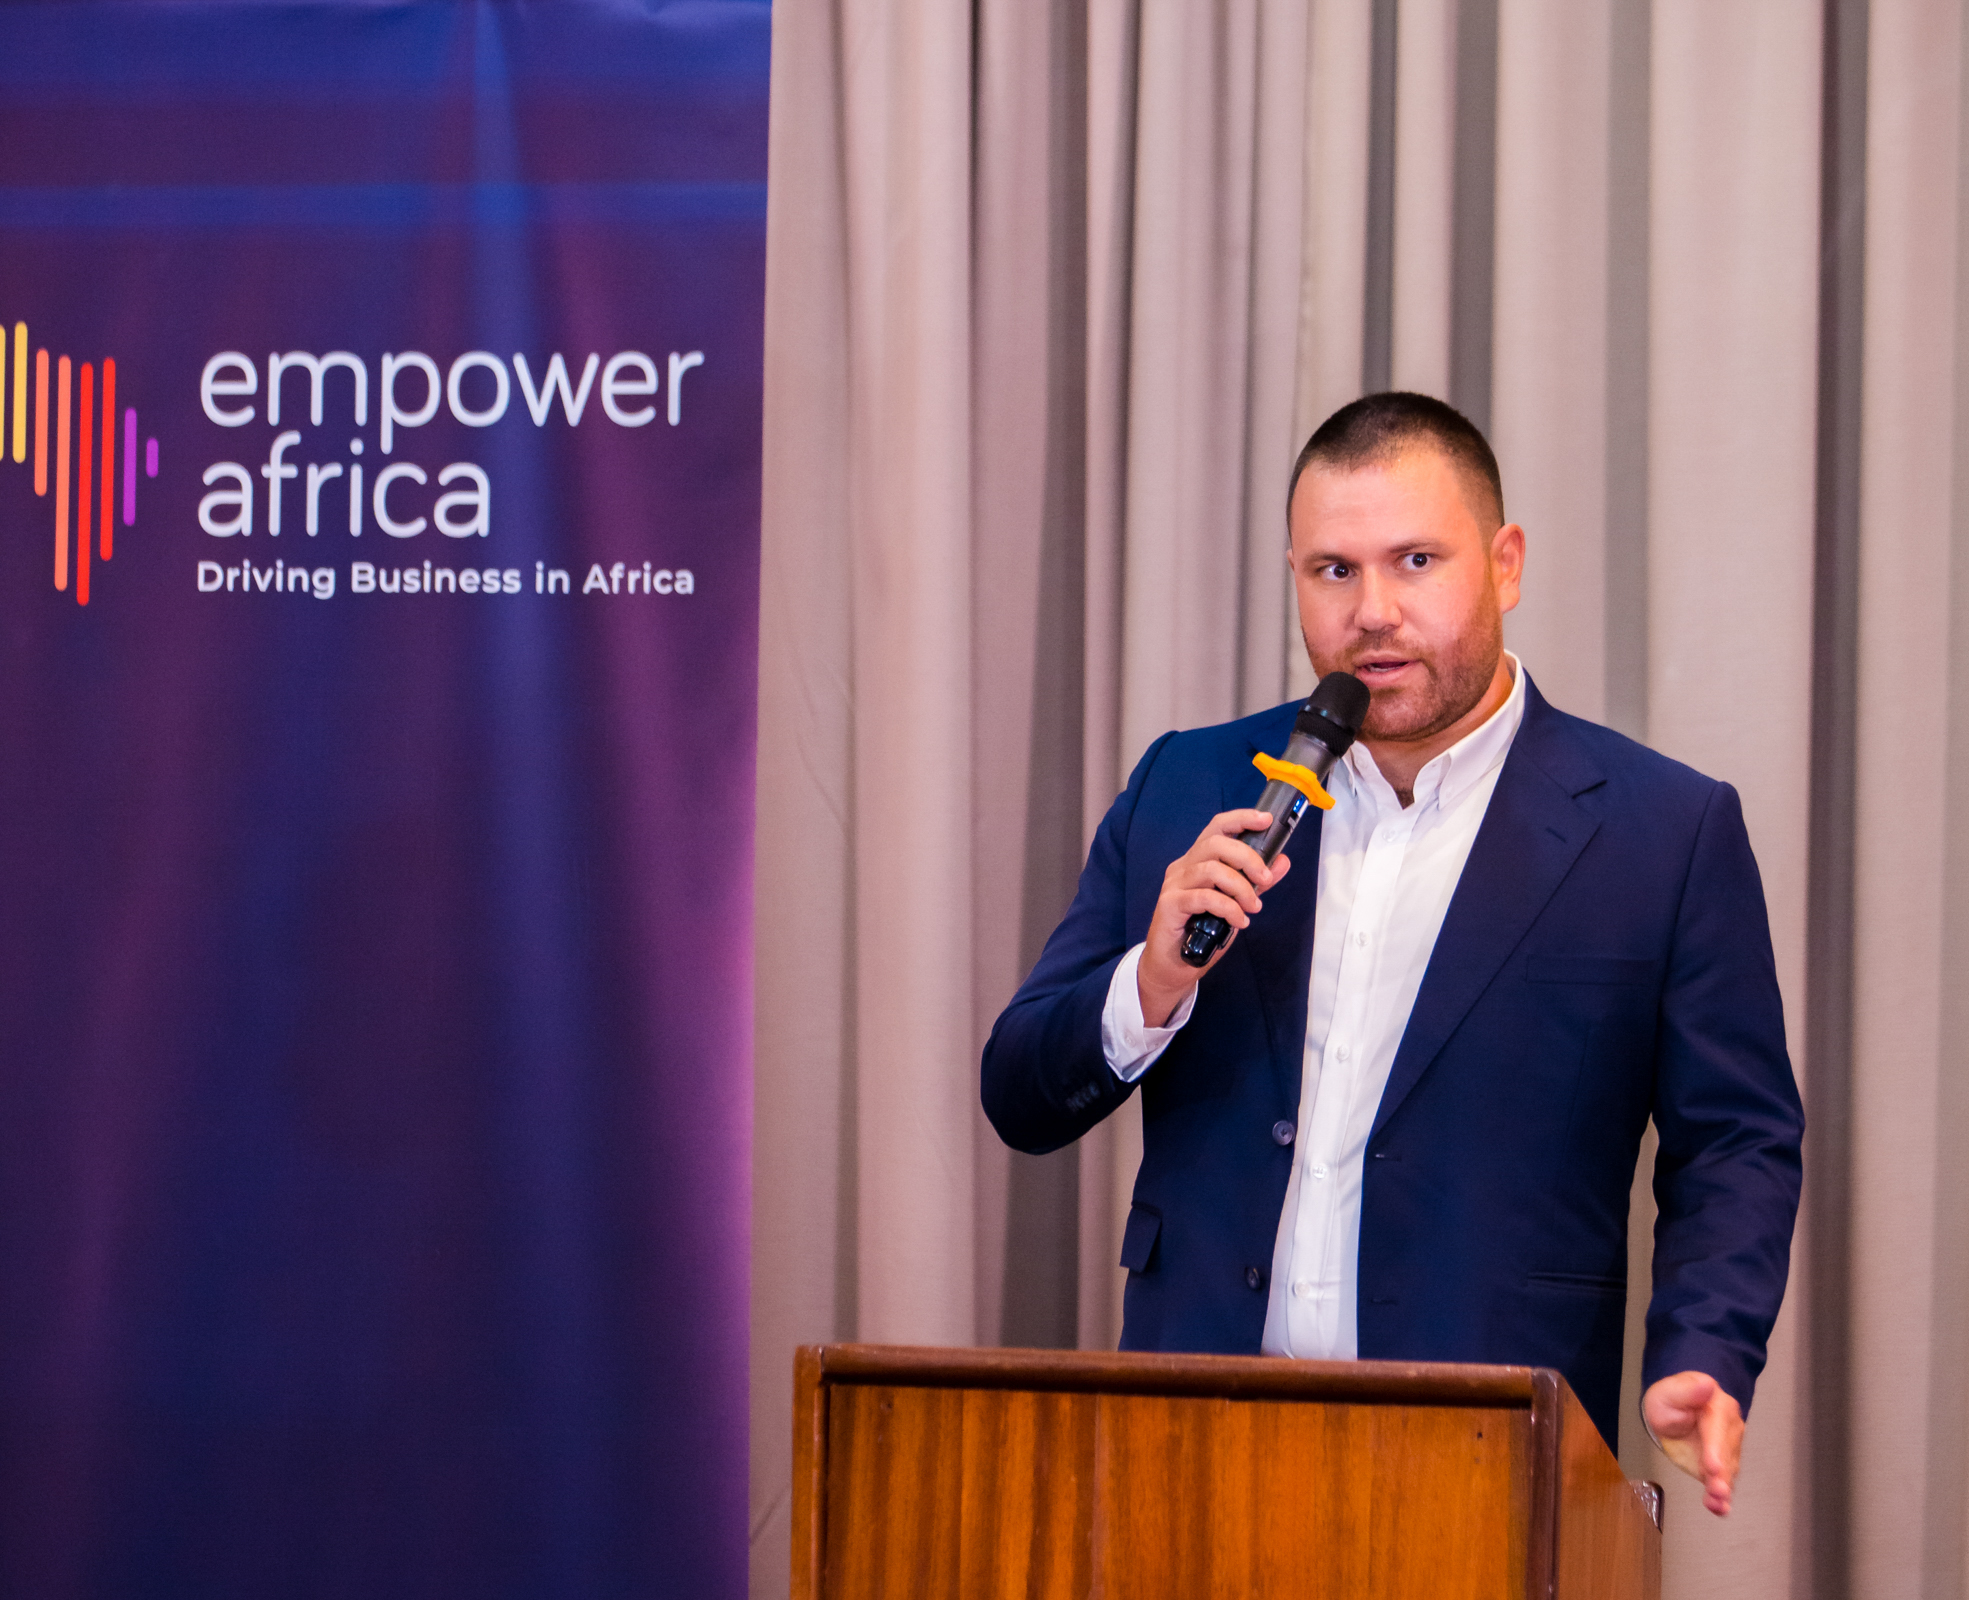 Caleb Zipperstein, one of the members of Empower Africa, speaks to delegates in Kigali during the launch of their business networking platform.